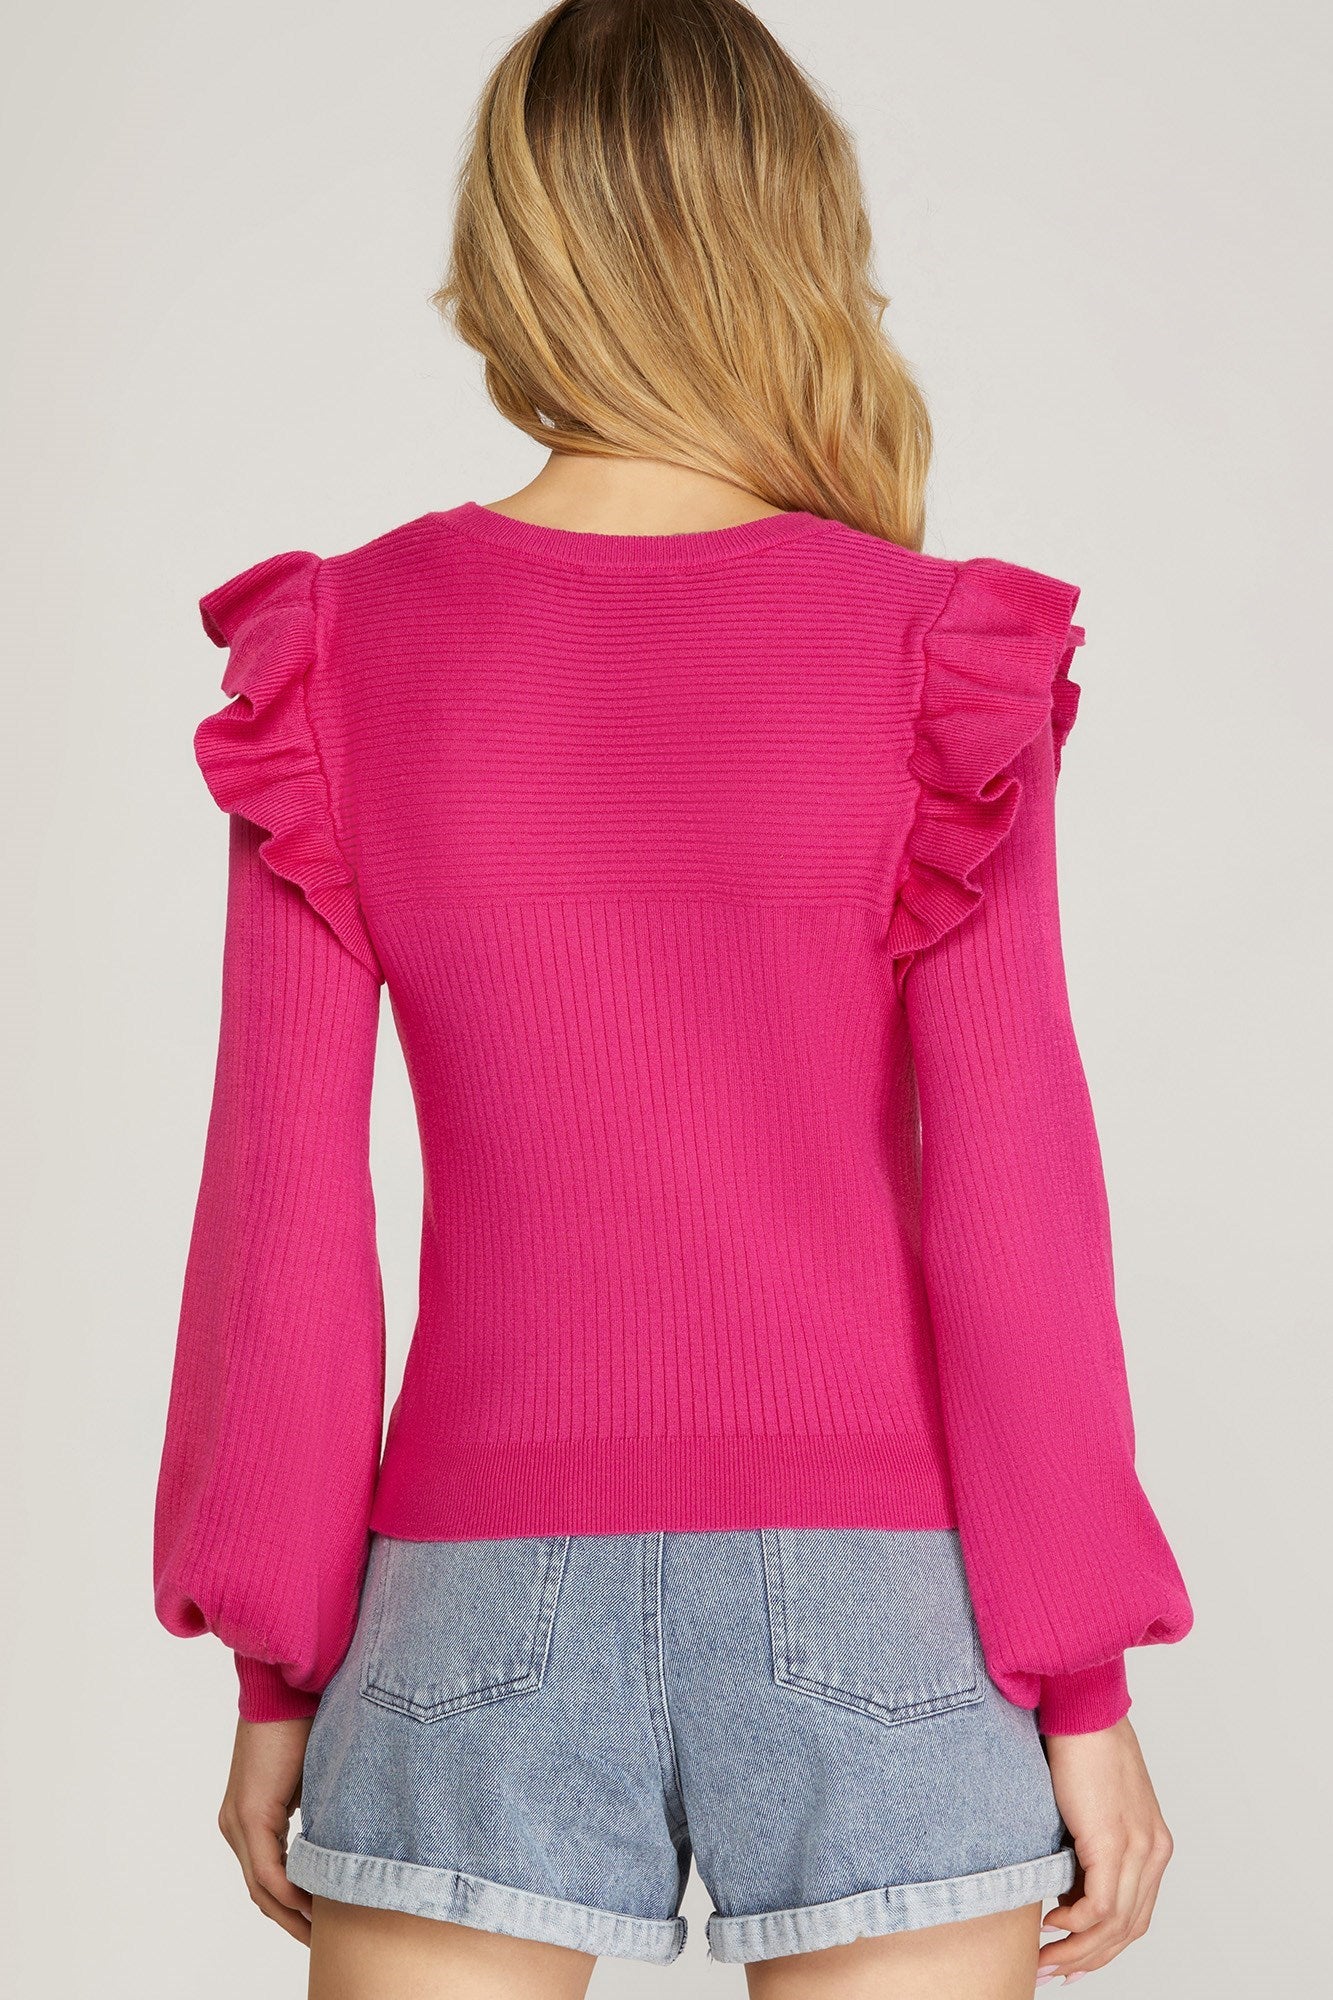 SHE AND SKY Women's Sweaters HOT PINK / S Long Ruffled Sleeve Sweater Top || David's Clothing SY5049